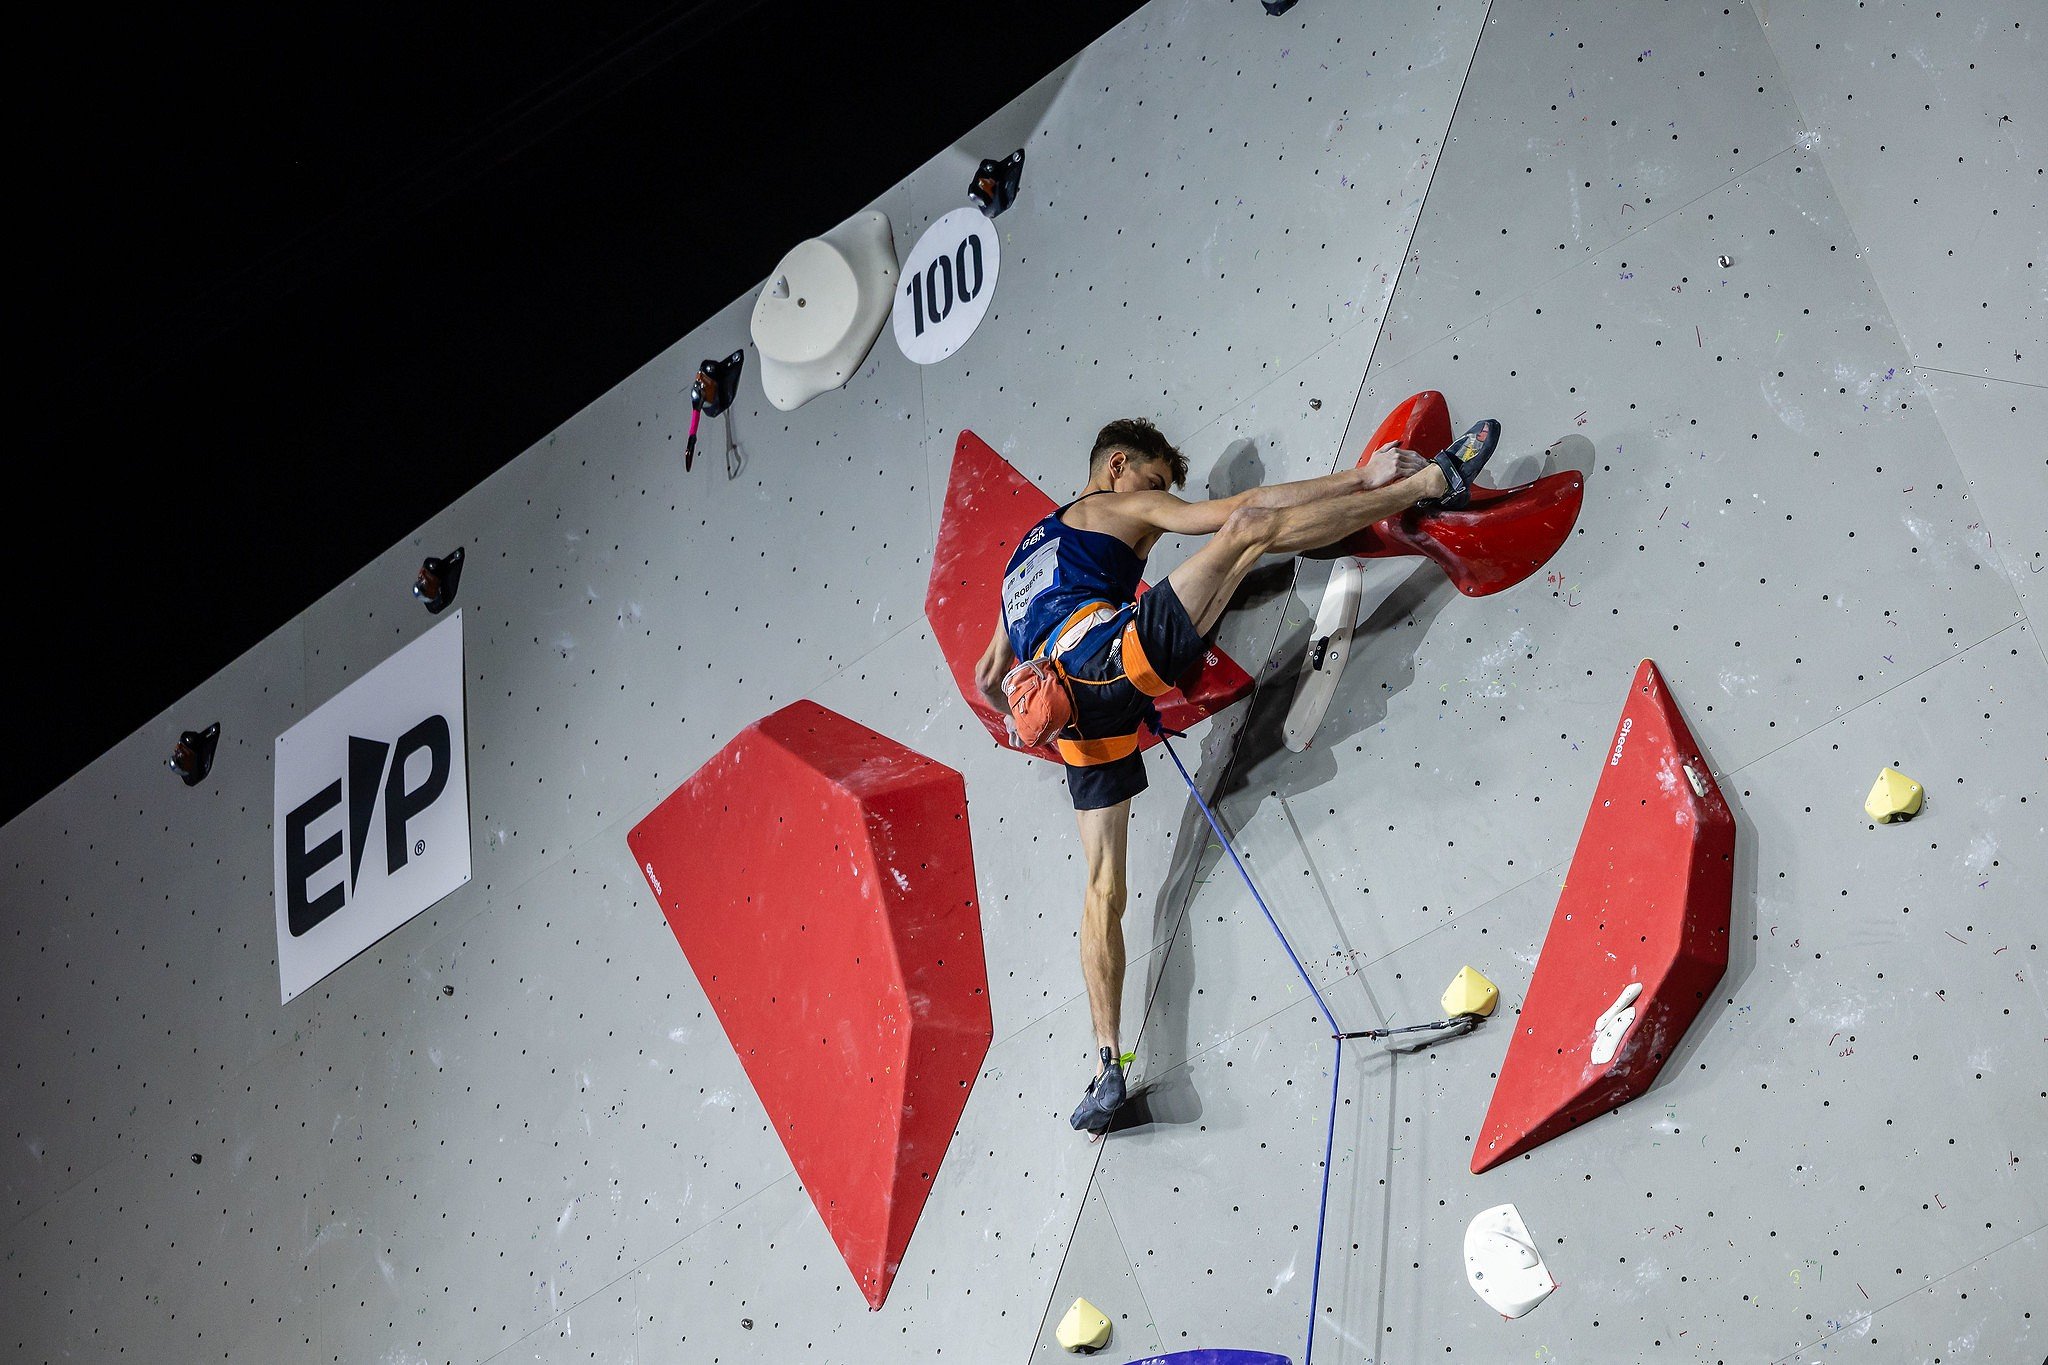 Toby Roberts competing in Laval  ©  Jan Virt/IFSC